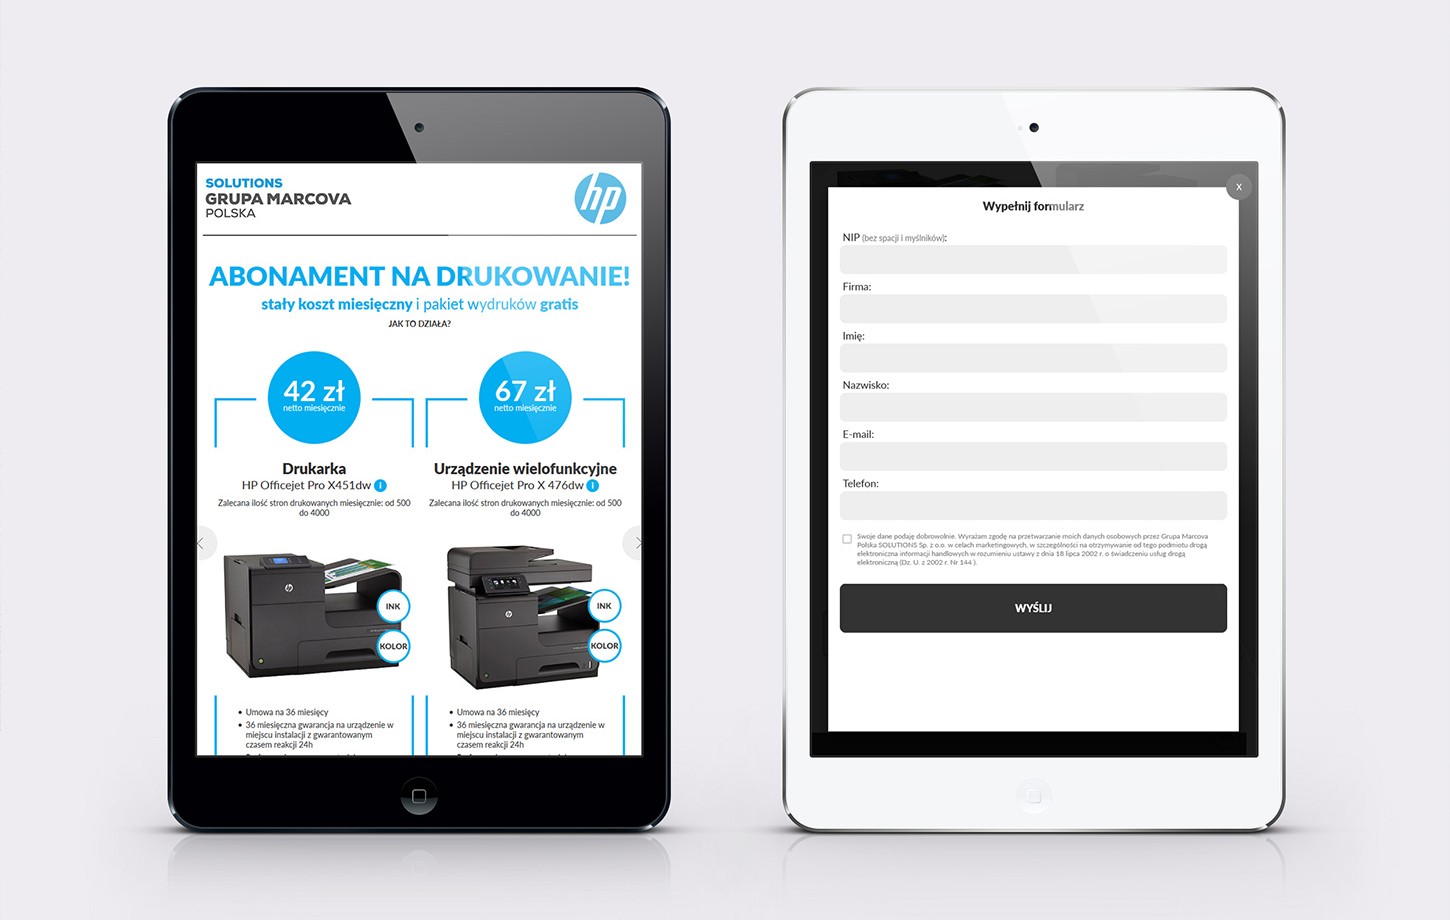 HP - Subscription to print